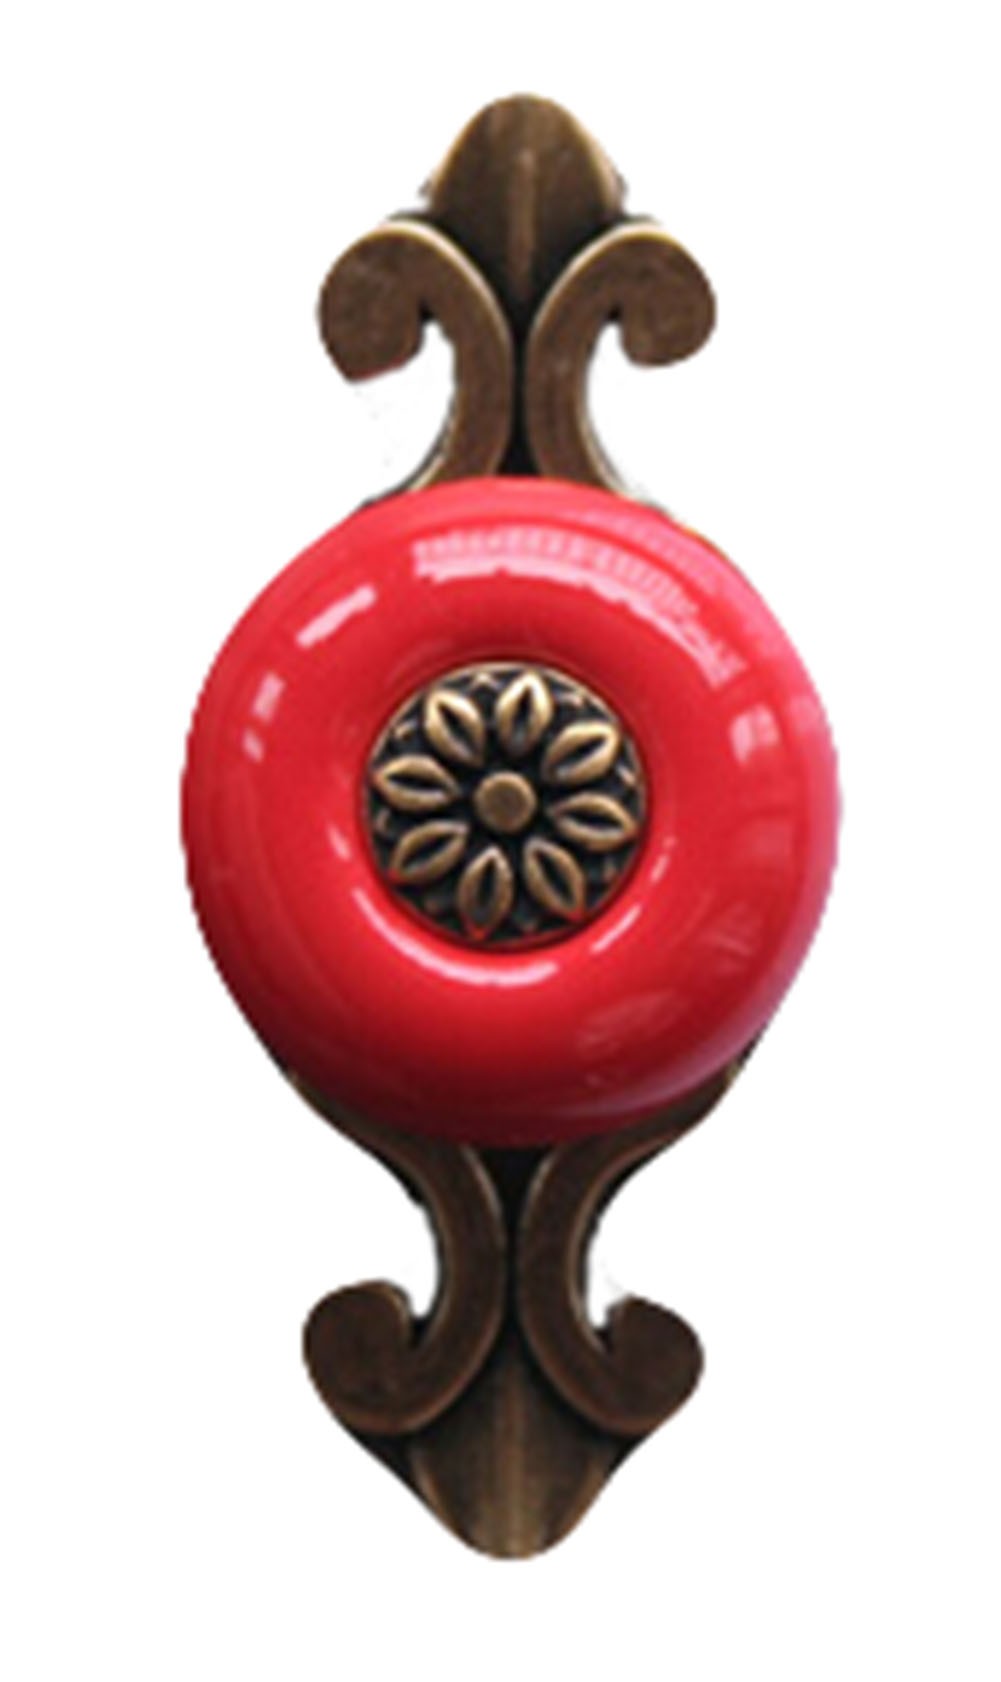 PANDA SUPERSTORE Continental Ceramic Cabinet Knob Drawer Pull Handle Red??Set of 2